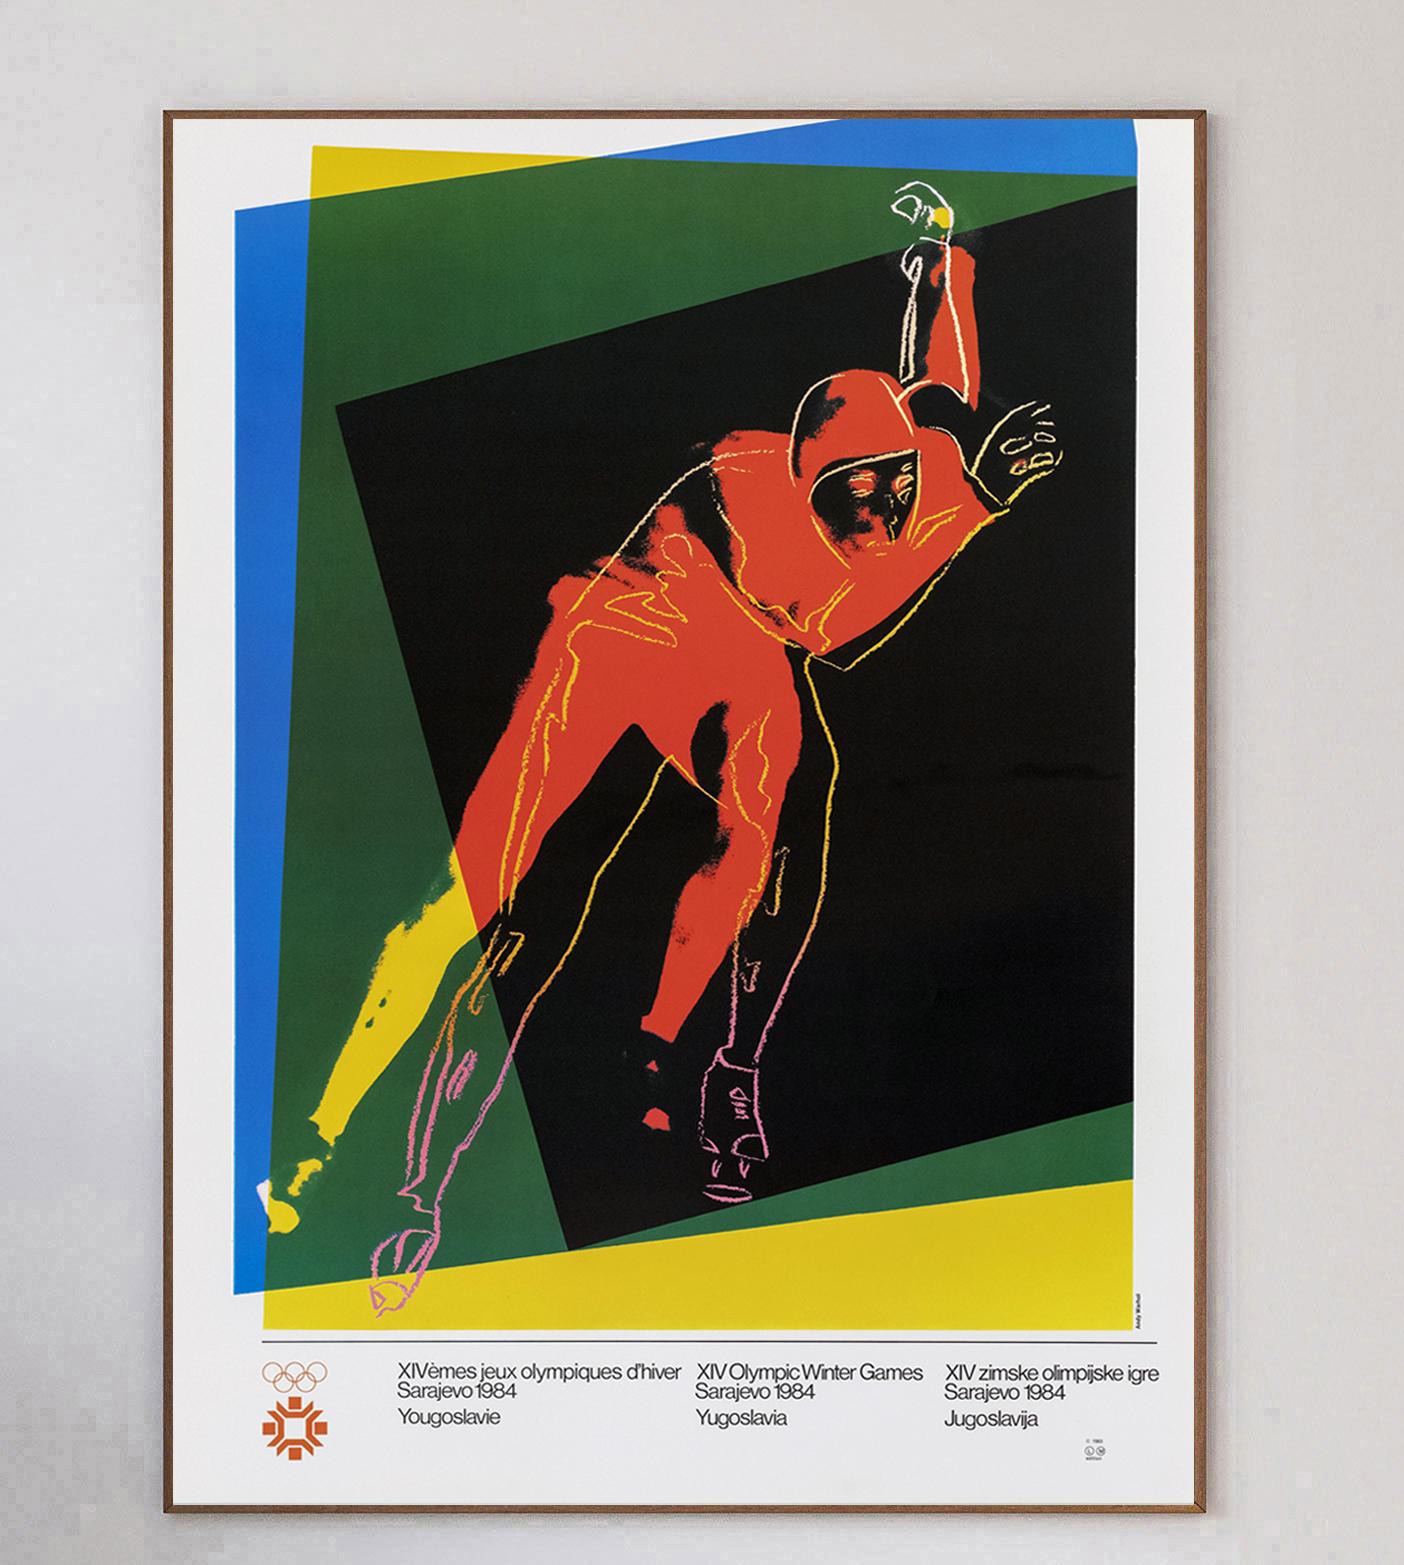 Legendary American pop artist Andy Warhol was one of several artists commissioned to create poster artworks to celebrate the 1984 Sarajevo Winter Olympic Games. The games in then Yugoslavia were the first Winter games to be held in a social